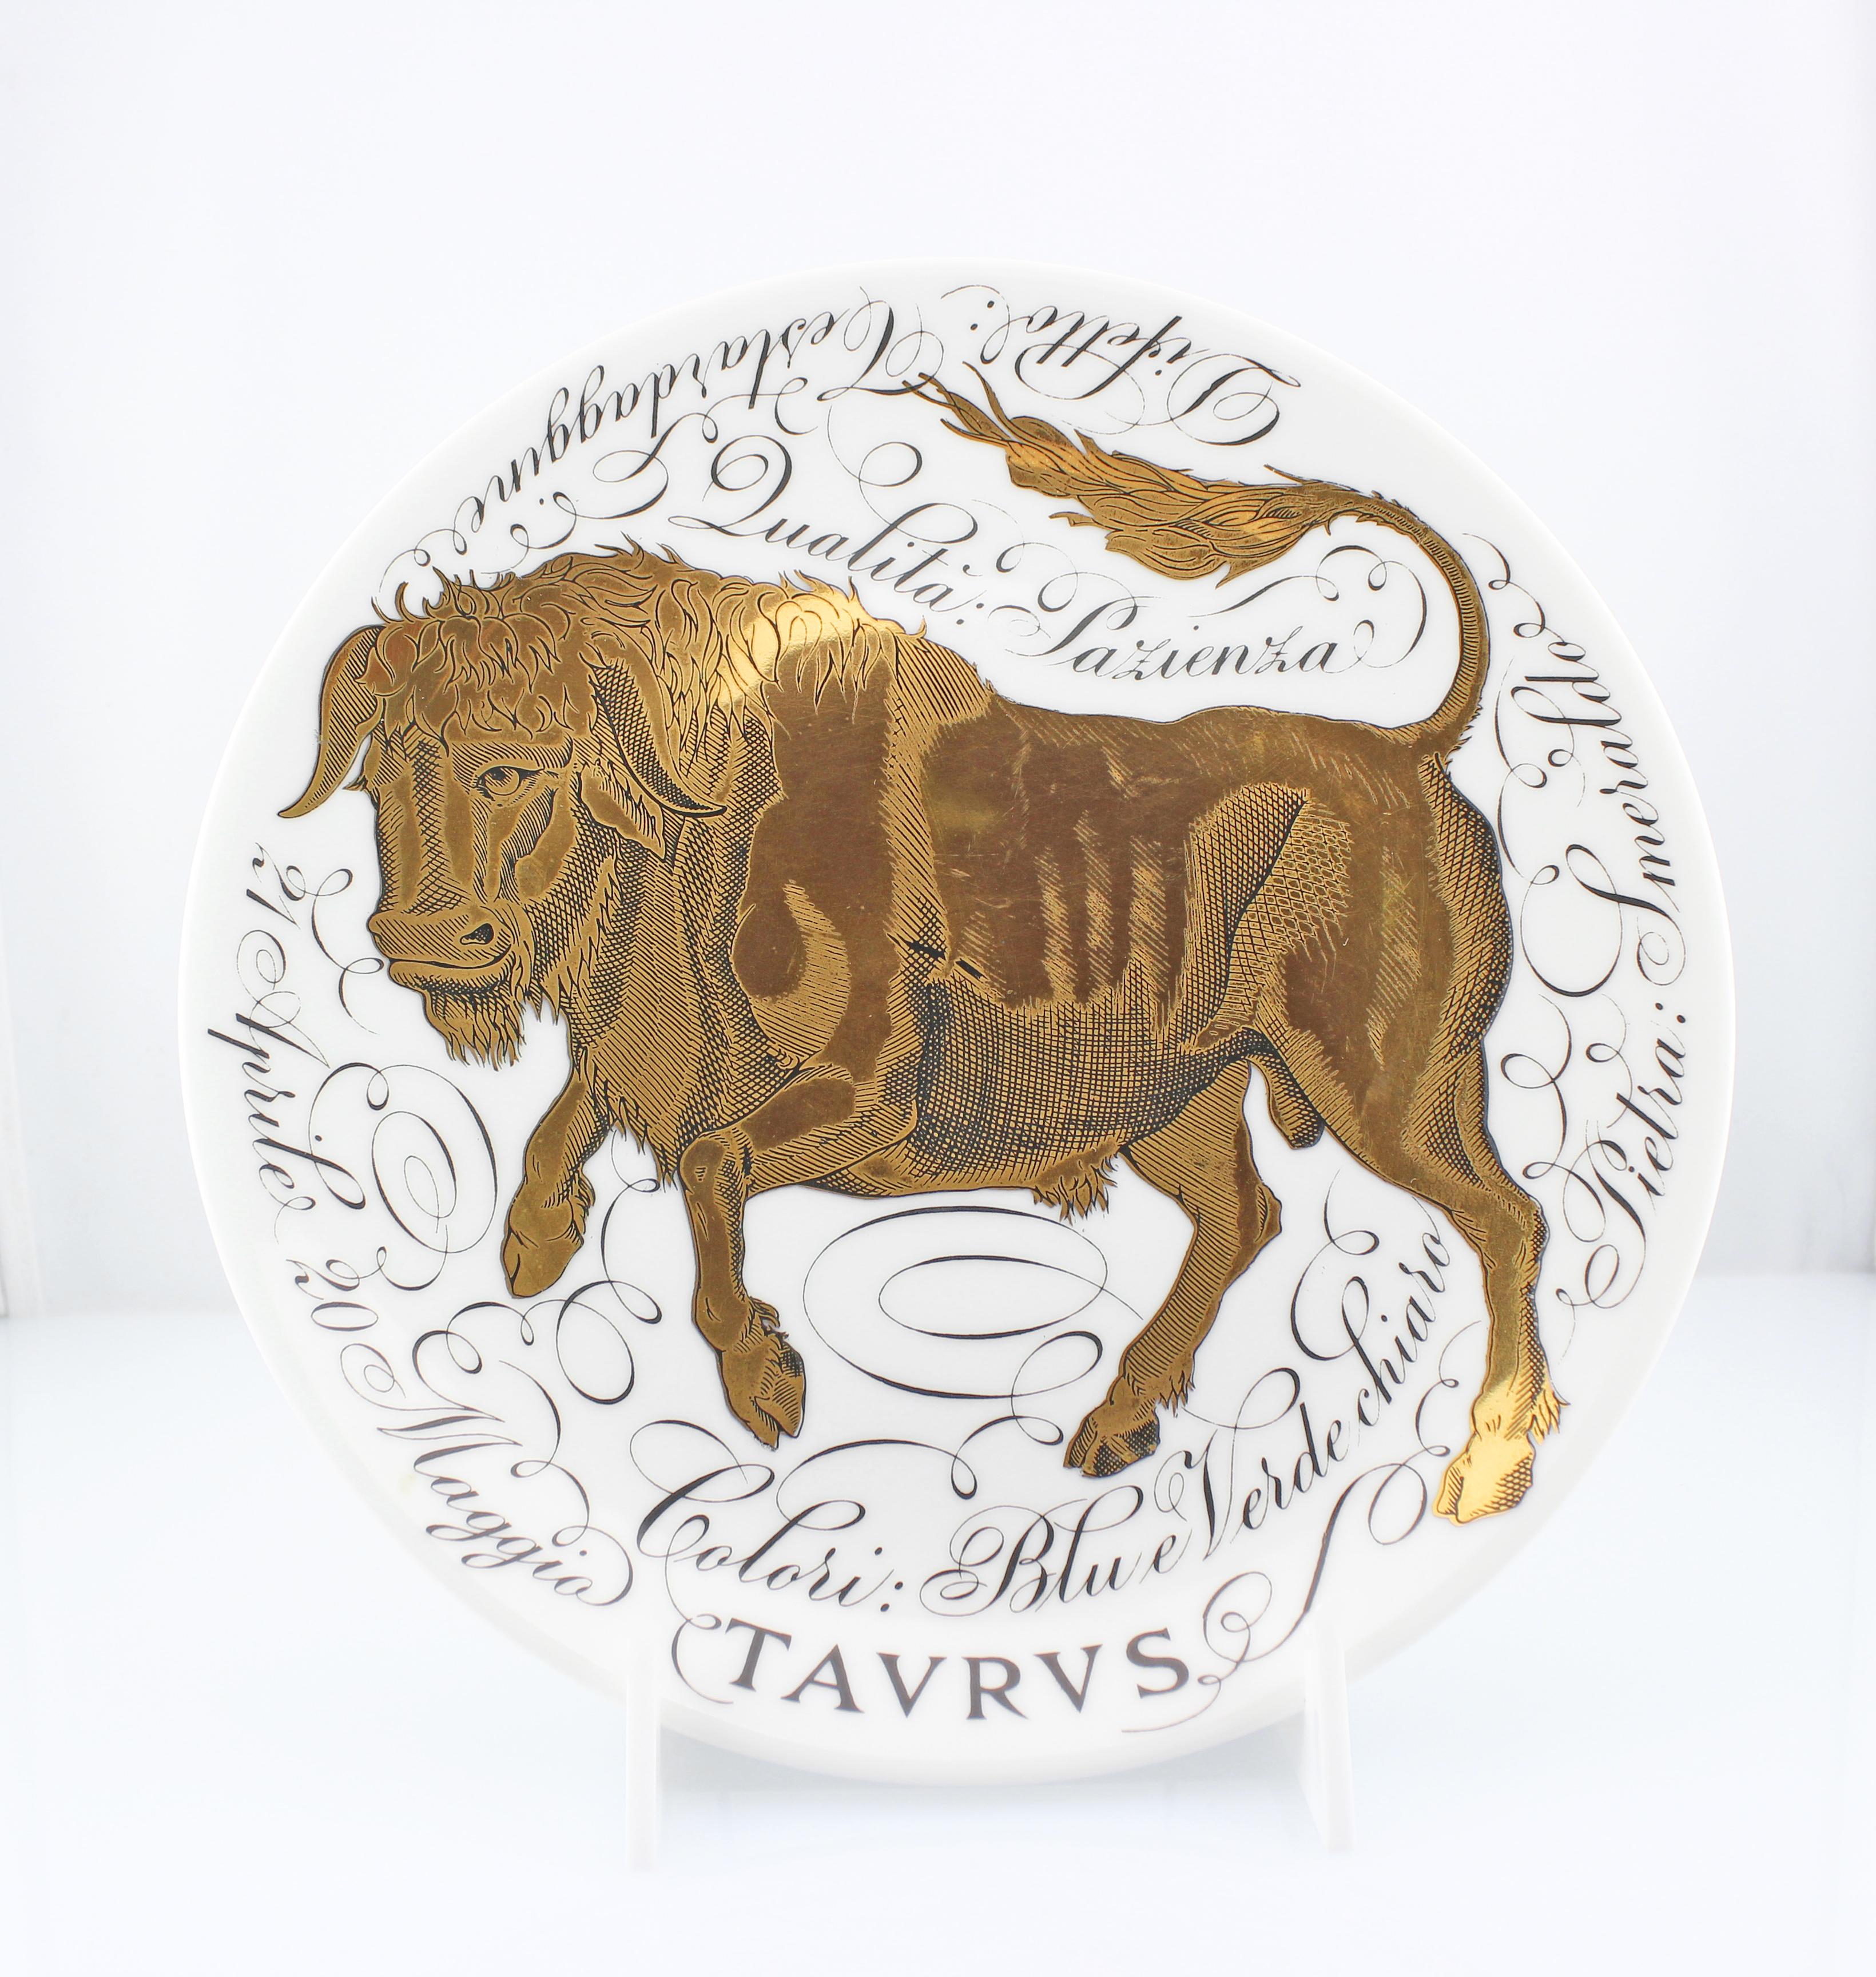 This rare and the most sought after collectibles vintage Piero Fornasetti porcelain lithographically-decorated and hand painted ceramic zodiac plate have a white background with words written in black color expressing the character and personality